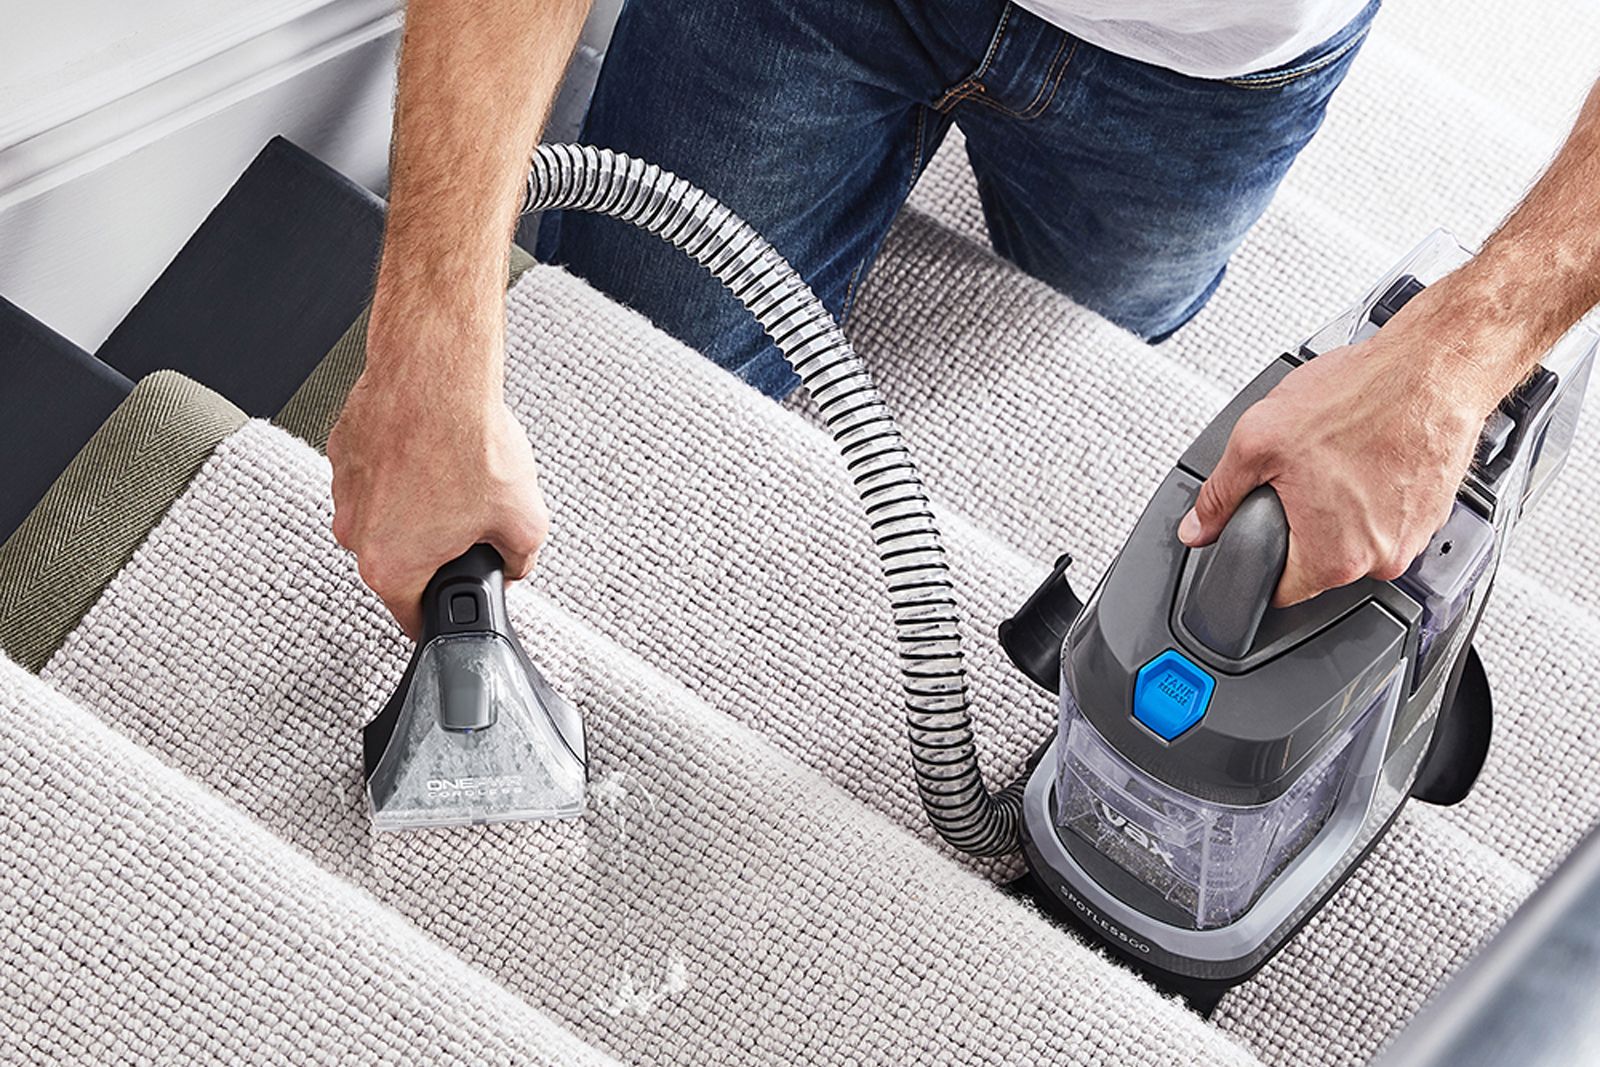 Vax powers up its cordless range led by the new Blade 4 vac and Glide hard floor cleaner image 1